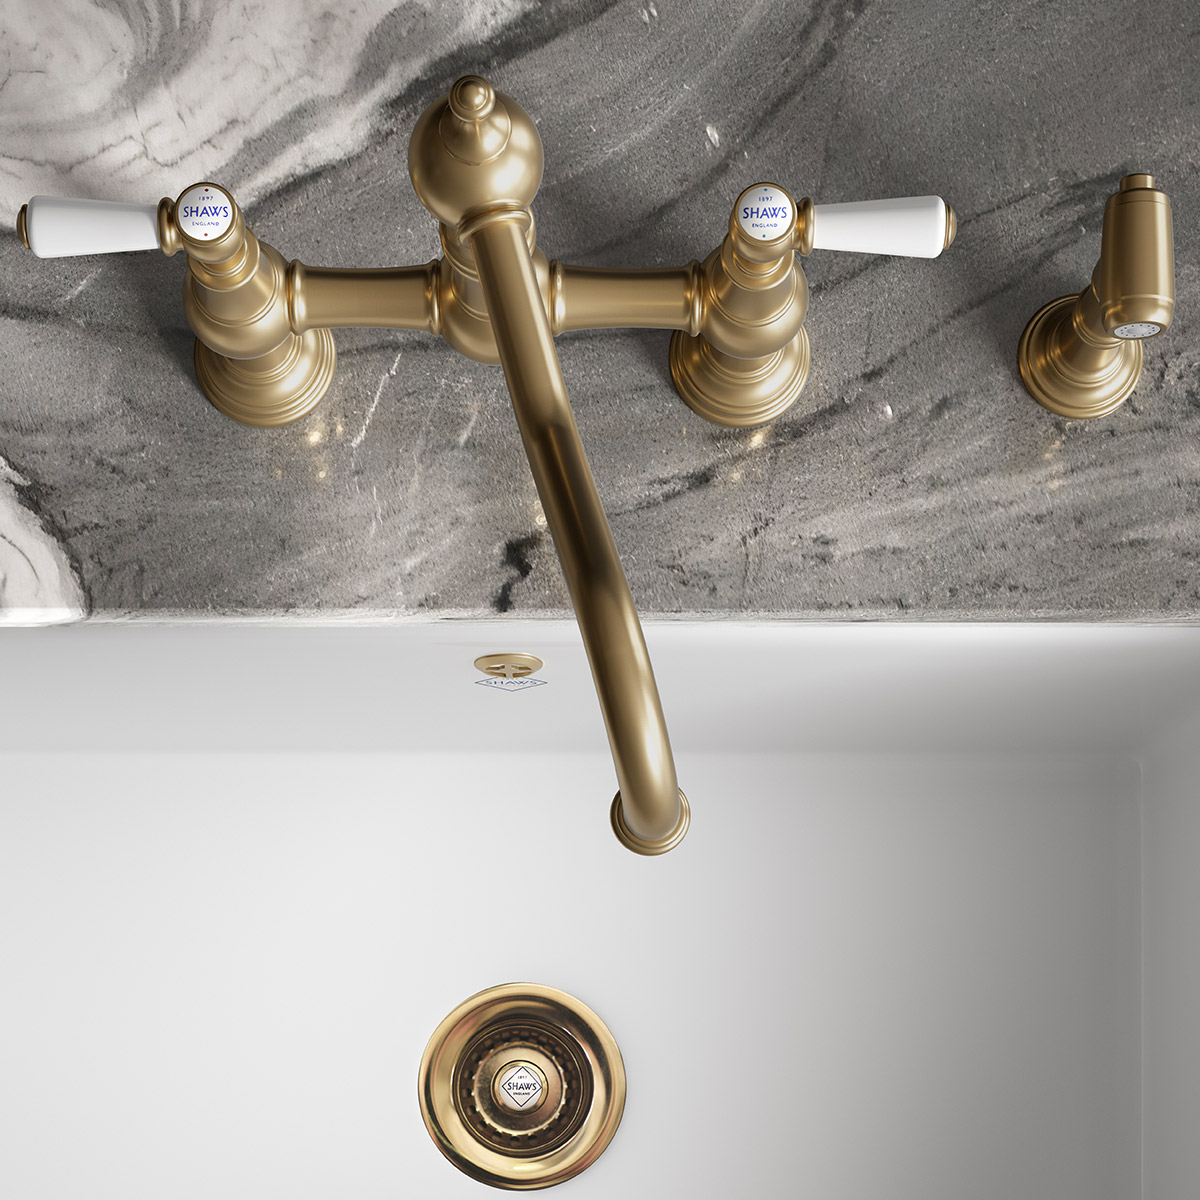 Shaws by Perrin & Rowe Hambleton French bridge mixer with spray rinse in Satin Brass. Provence style kitchen tap AUSH.4756. Distributed in Australia by Luxe by Design, Brisbane.